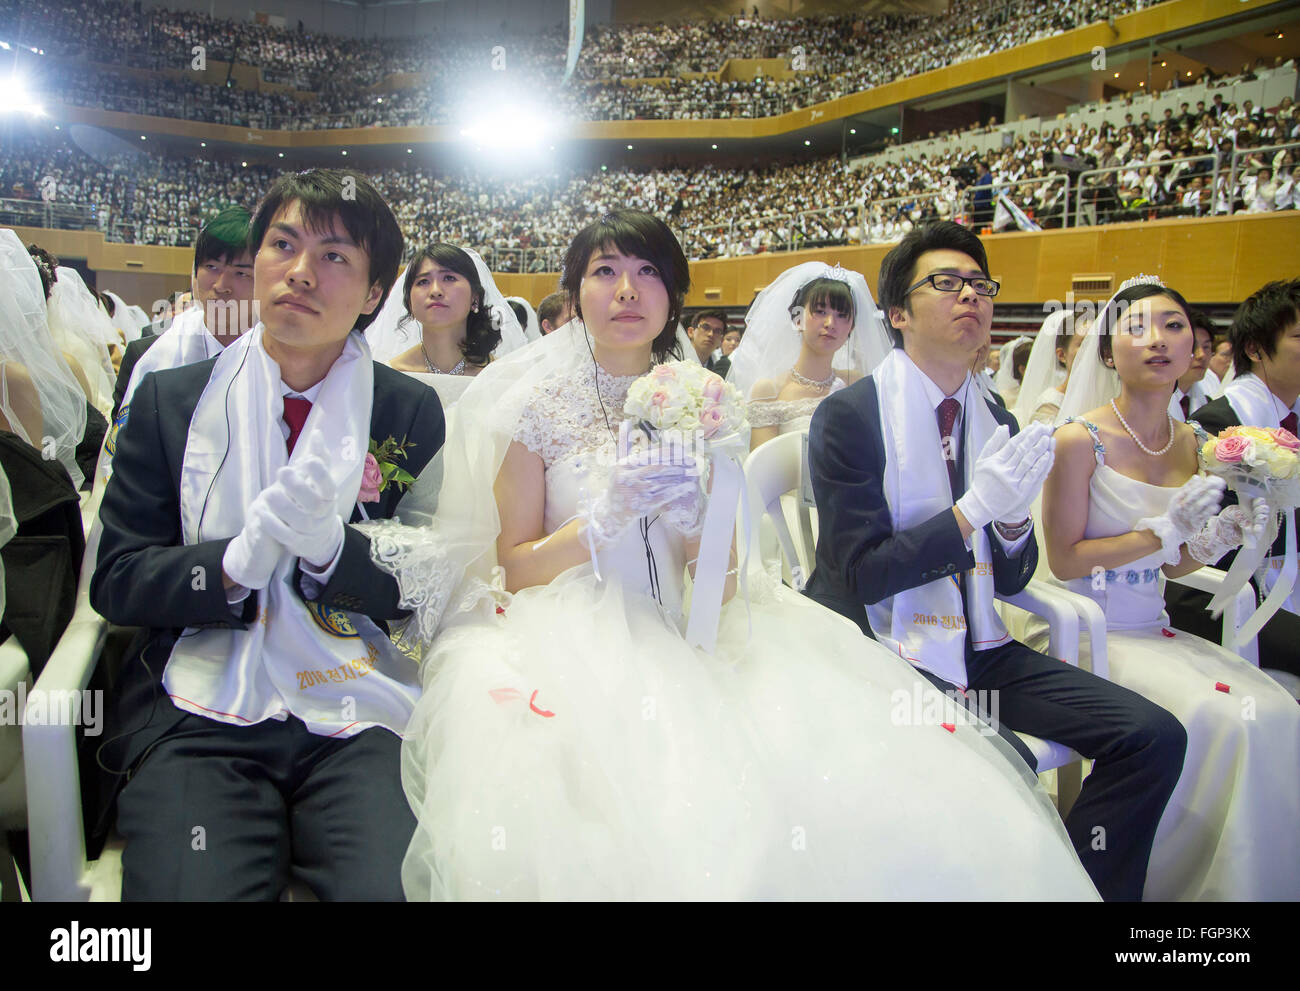 Unification Church's mass wedding, Feb 20, 2016 : Newlyweds participate in a mass wedding ceremony of the Unification Church at the Cheong Shim Peace World Center in Gapyeong, about 60 km (37 miles) east of Seoul, South Korea.The church said about 3,000 couples from more than 60 countries participated in the mass wedding in Gapyeong and other 12,000 couples attended in the wedding ceremony through live-streamed broadcast, which was organized by Han Hak-Ja, widow of the late Rev. Moon Sun-Myung, founder of the Unification Church. © Lee Jae-Won/AFLO/Alamy Live News Stock Photo